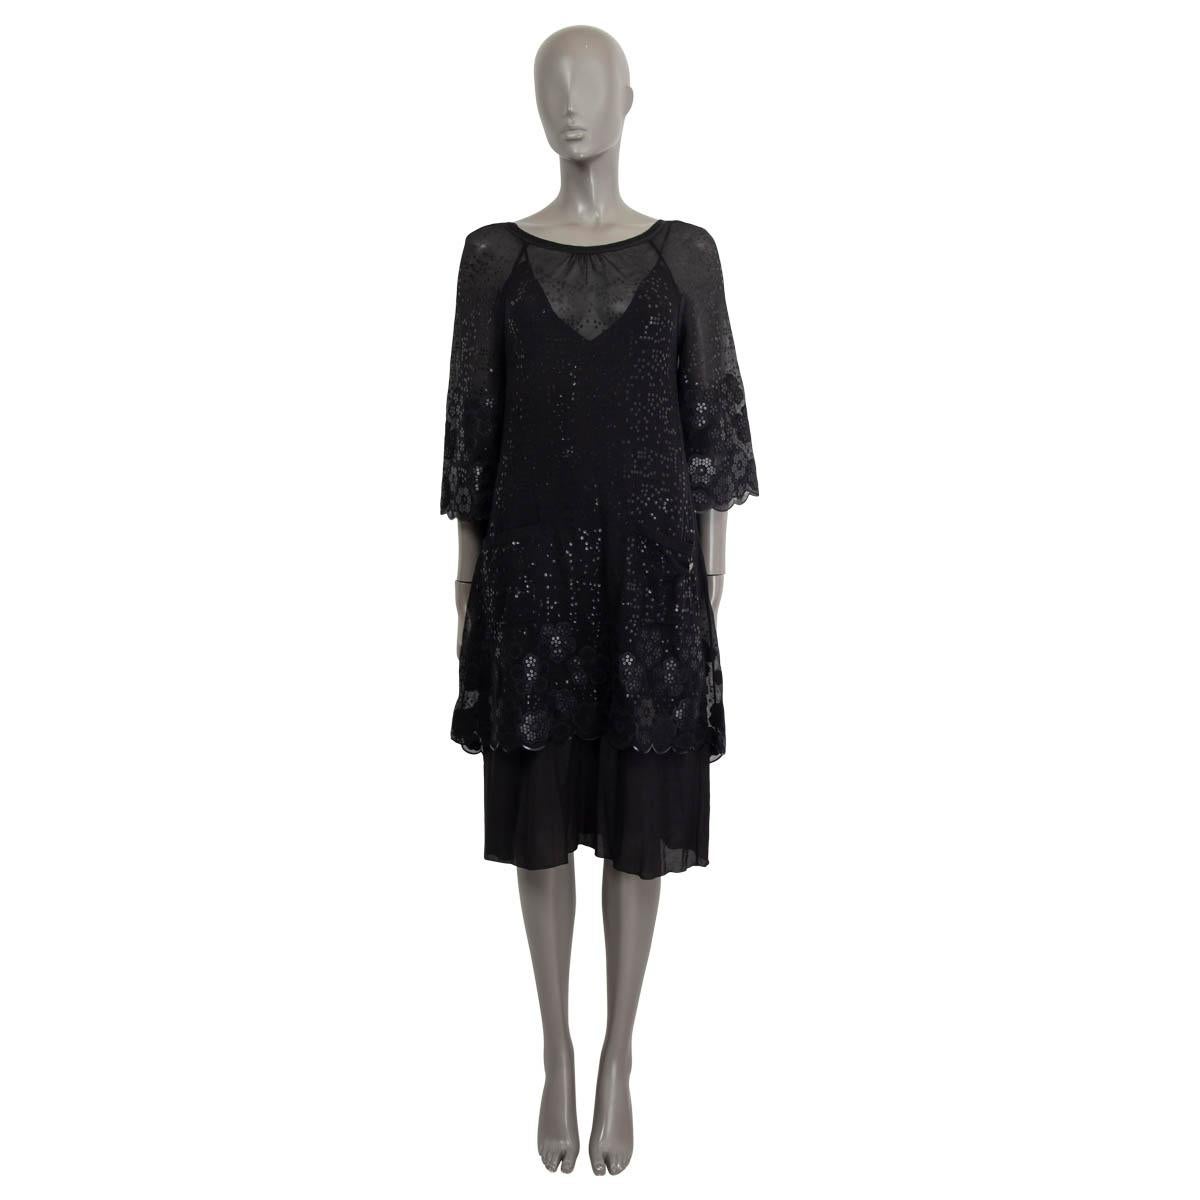 100% authentic Chanel sheer mini dress in black silk and polyamide (assumed cause tag is missing). Embellished with sequin camellias all over the dress. Features 7/8 raglan sleeves (sleeve measurements taken from the neck) and two patch pockets on